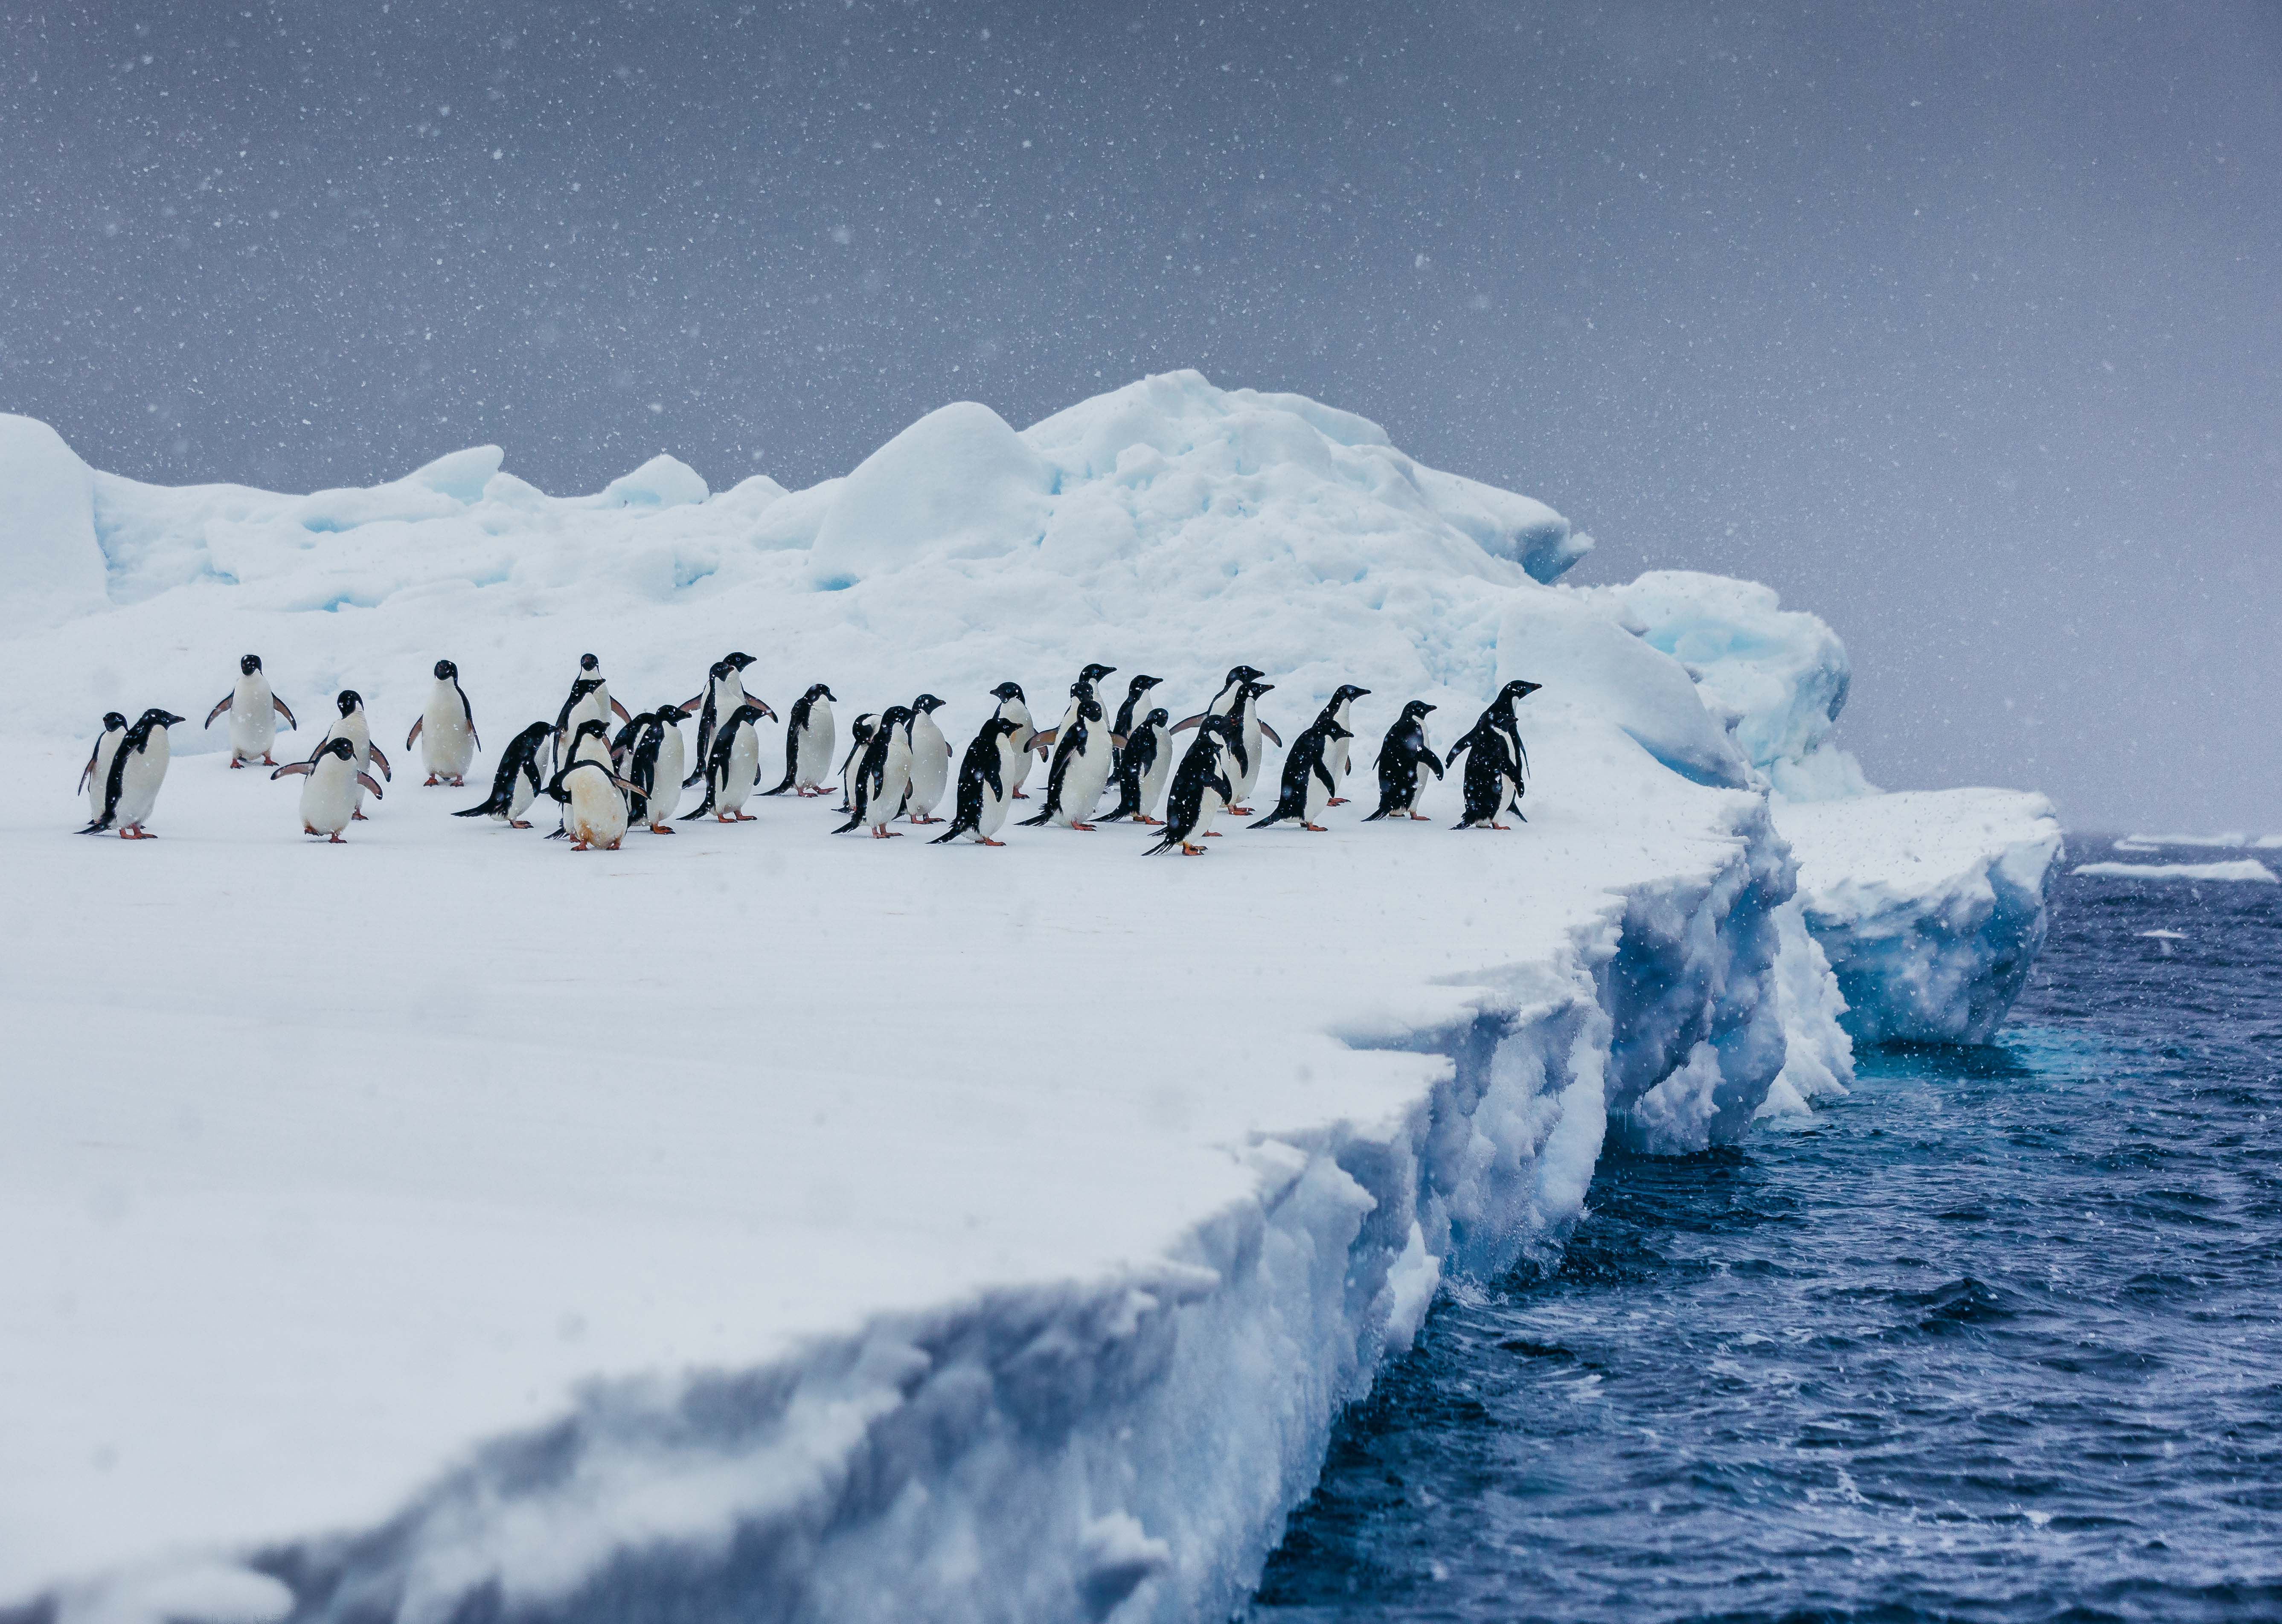 A common sight in Antarctica: Adelie penguins marching  (or waddling) toward the ocean.